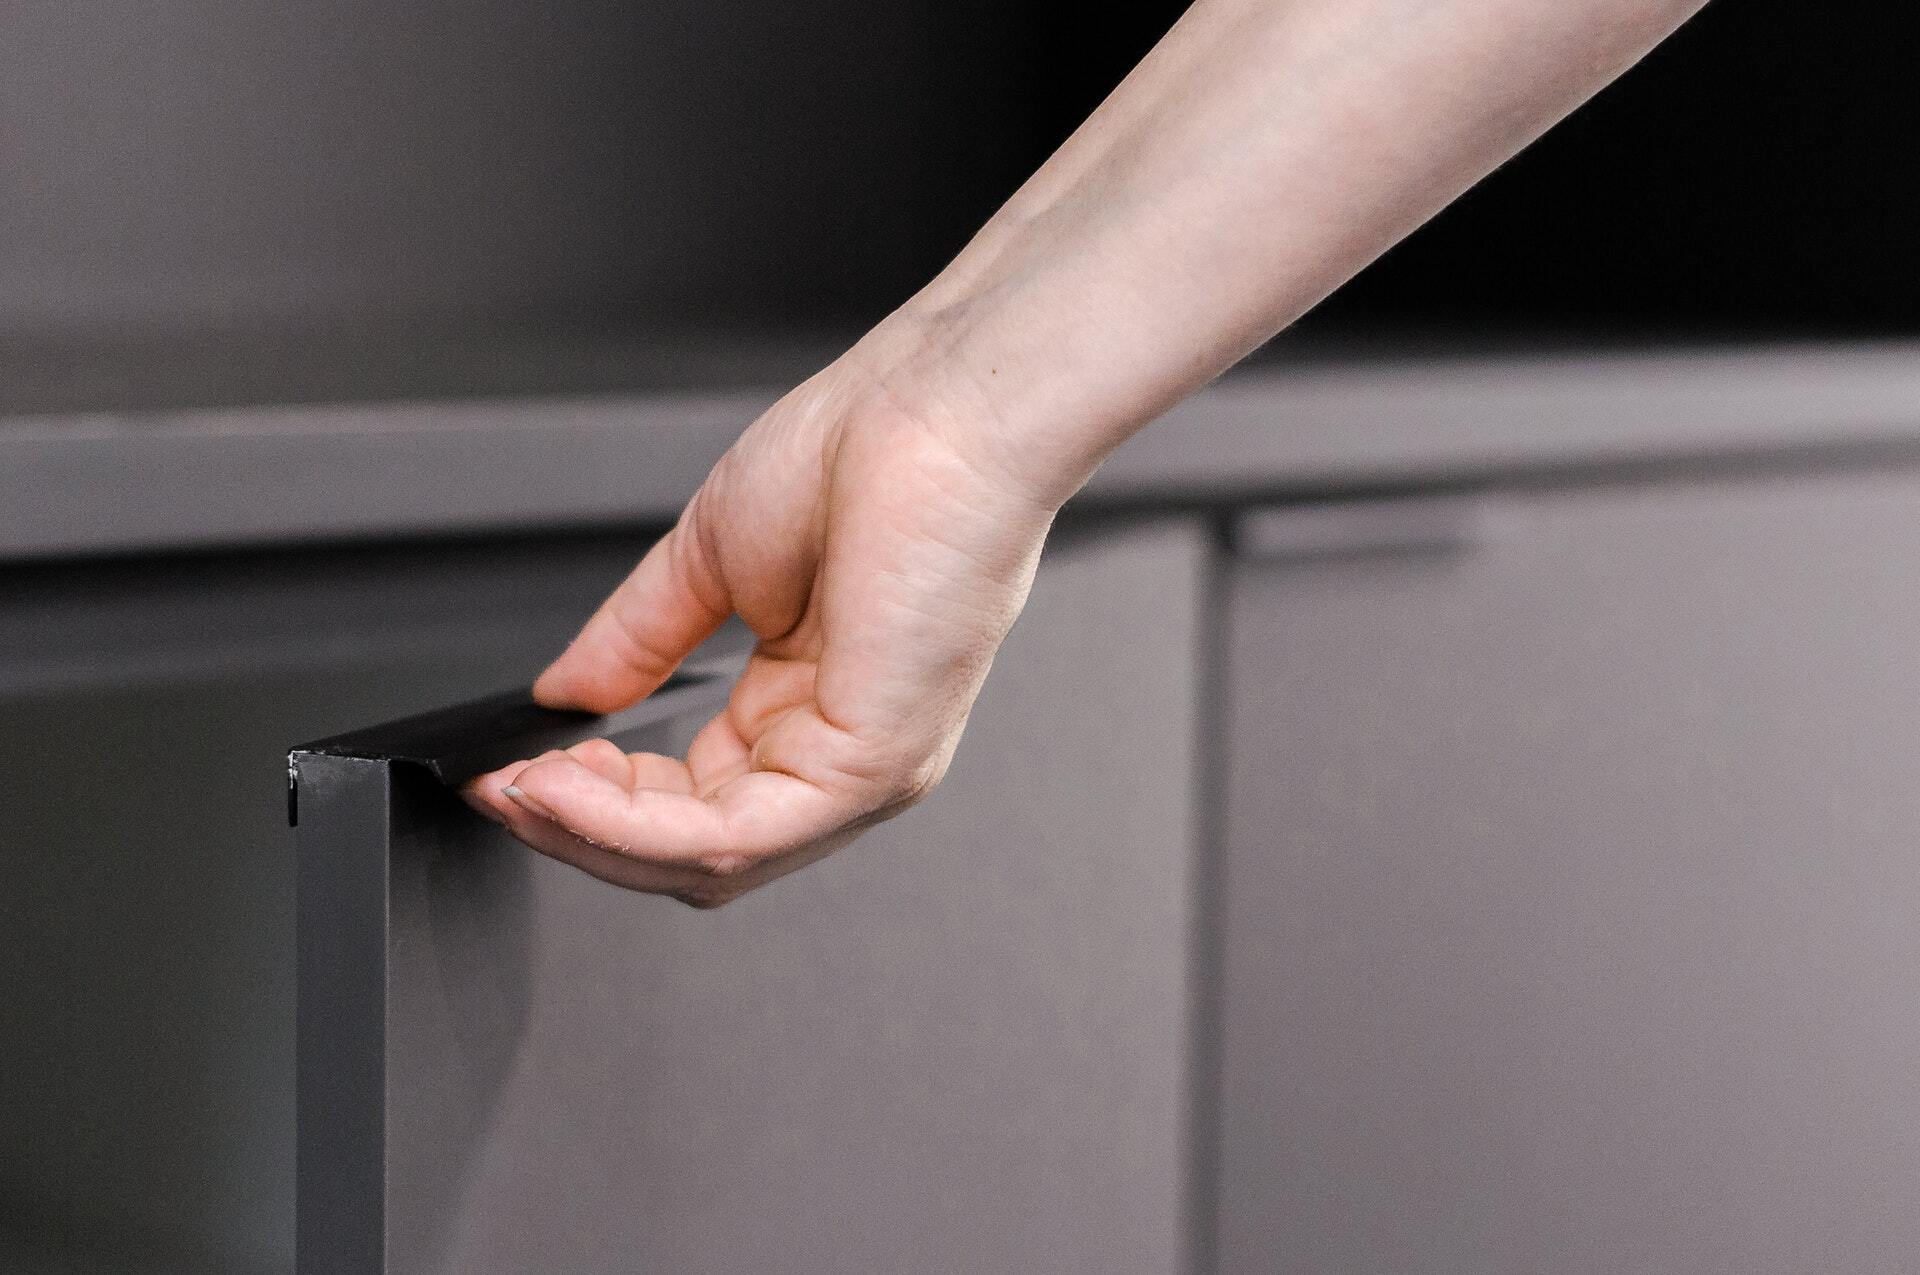 hand opening cabinet